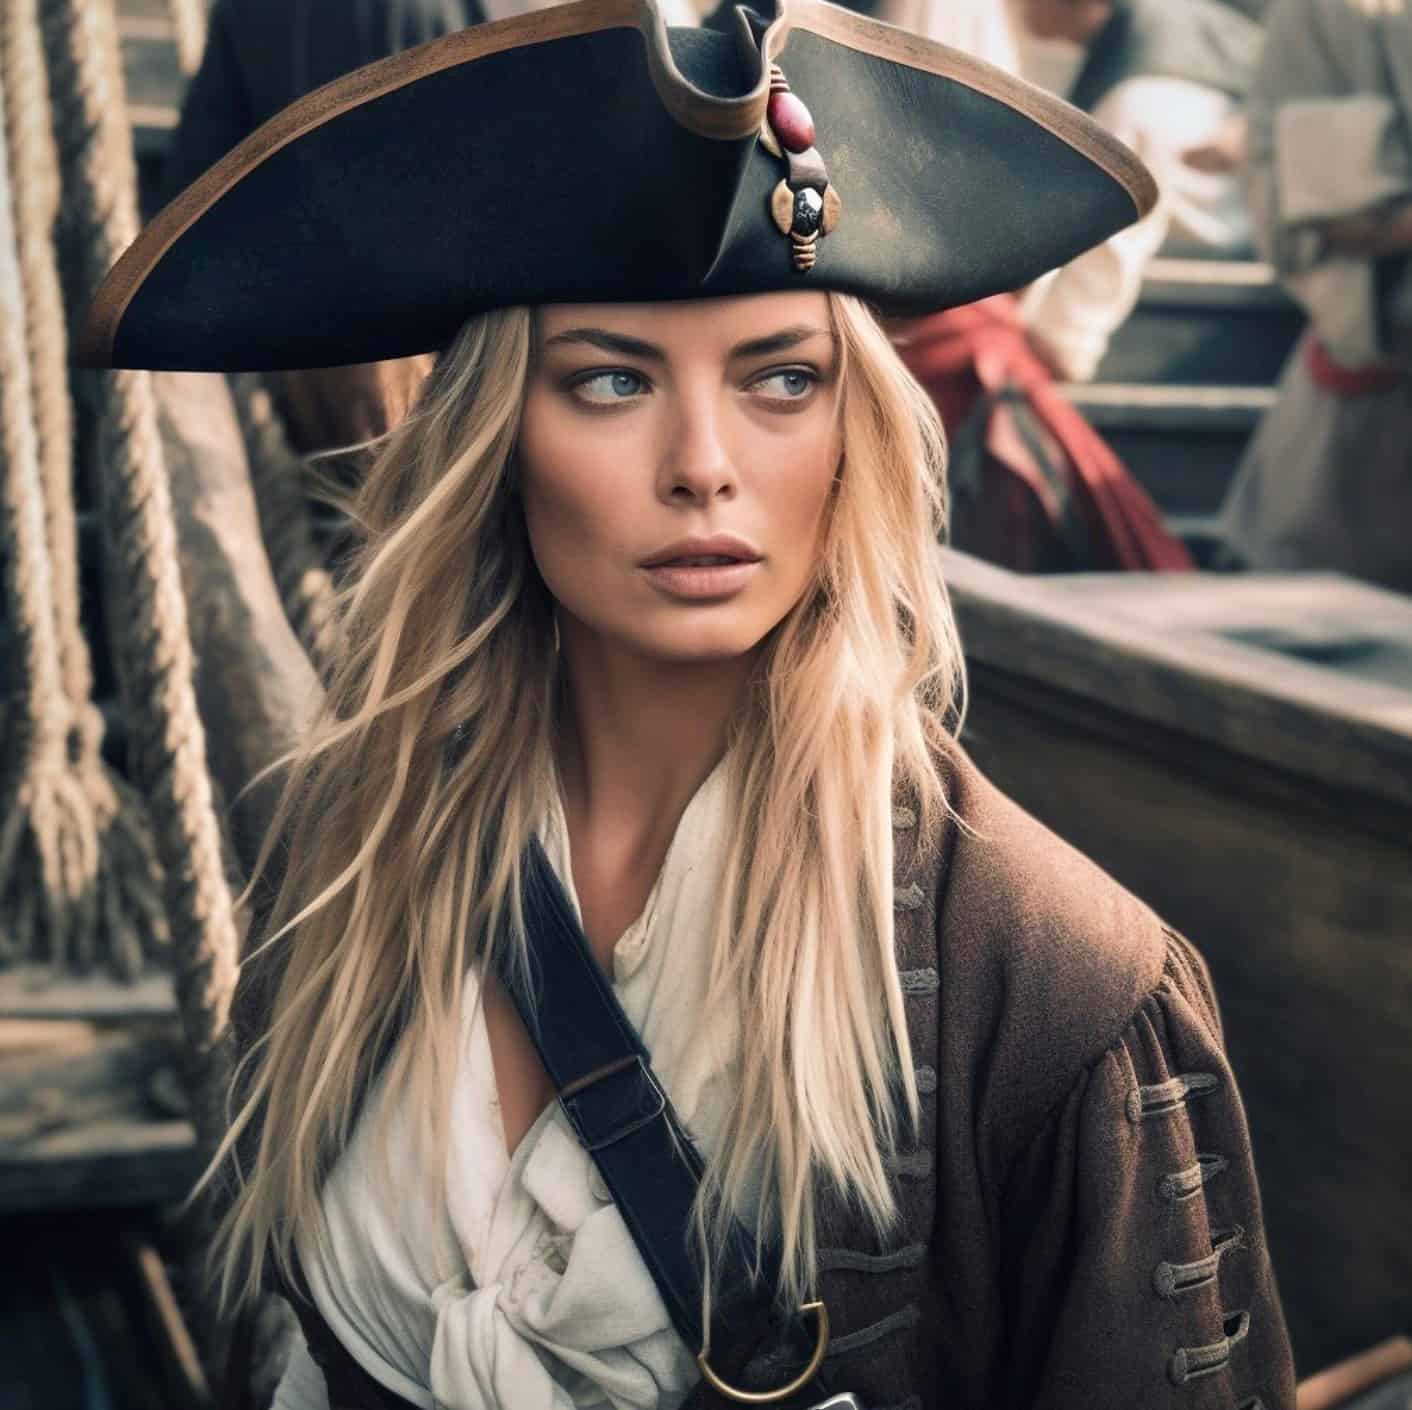 See Margot Robbie Ready To Replace Johnny Depp In Full Pirate Costume